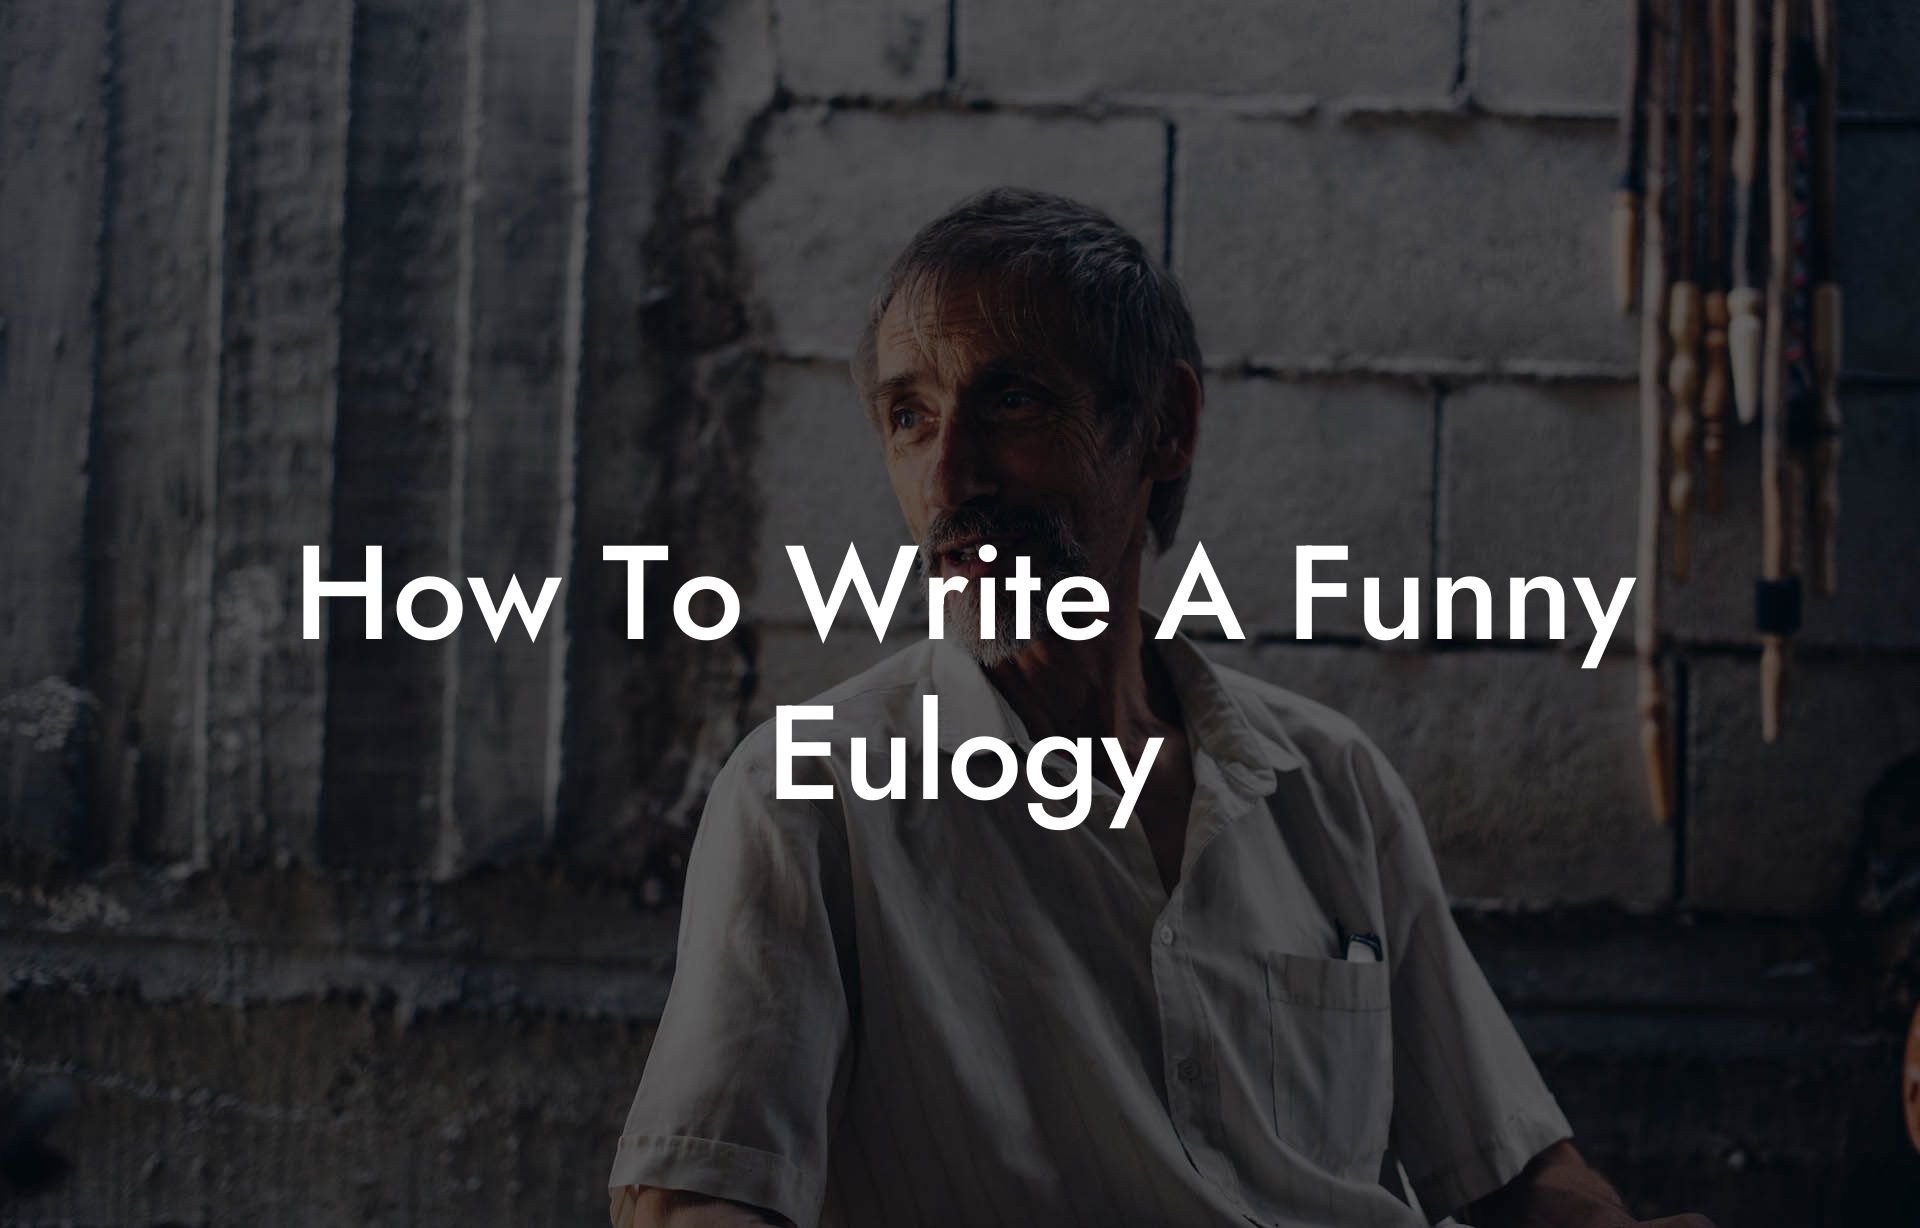 How To Write A Funny Eulogy